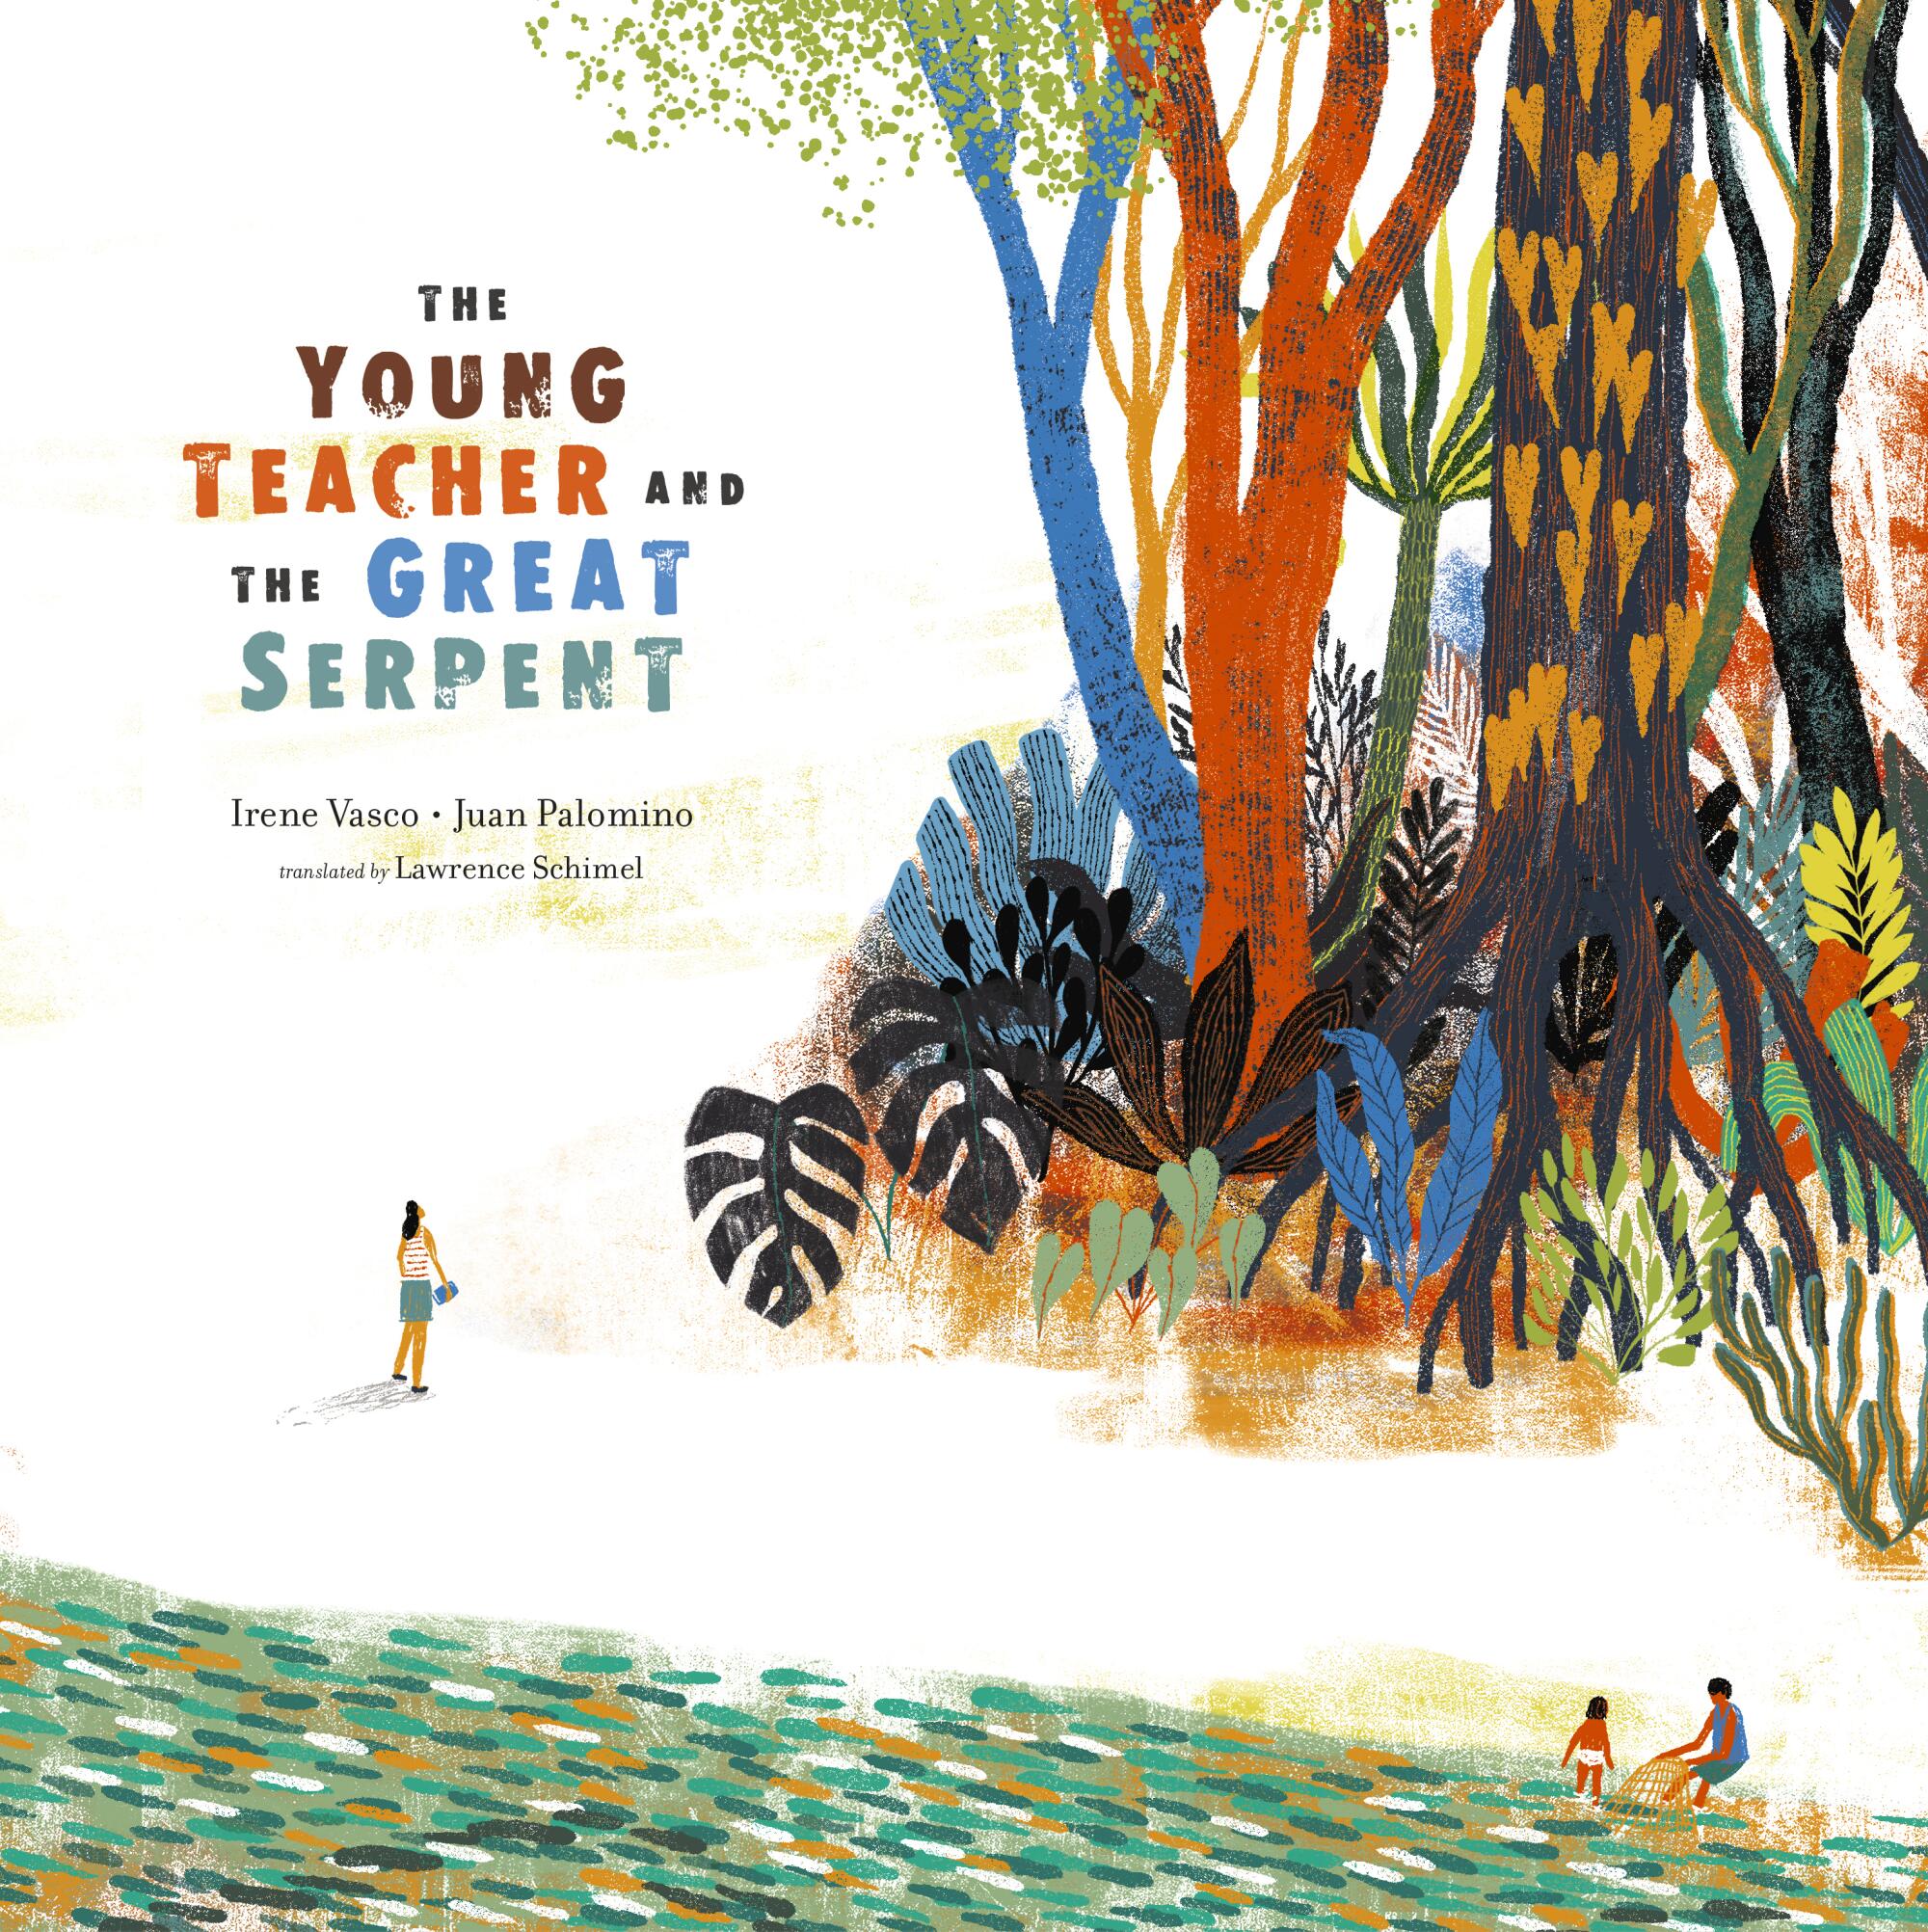 "The Young Teacher and the Great Serpent" book cover